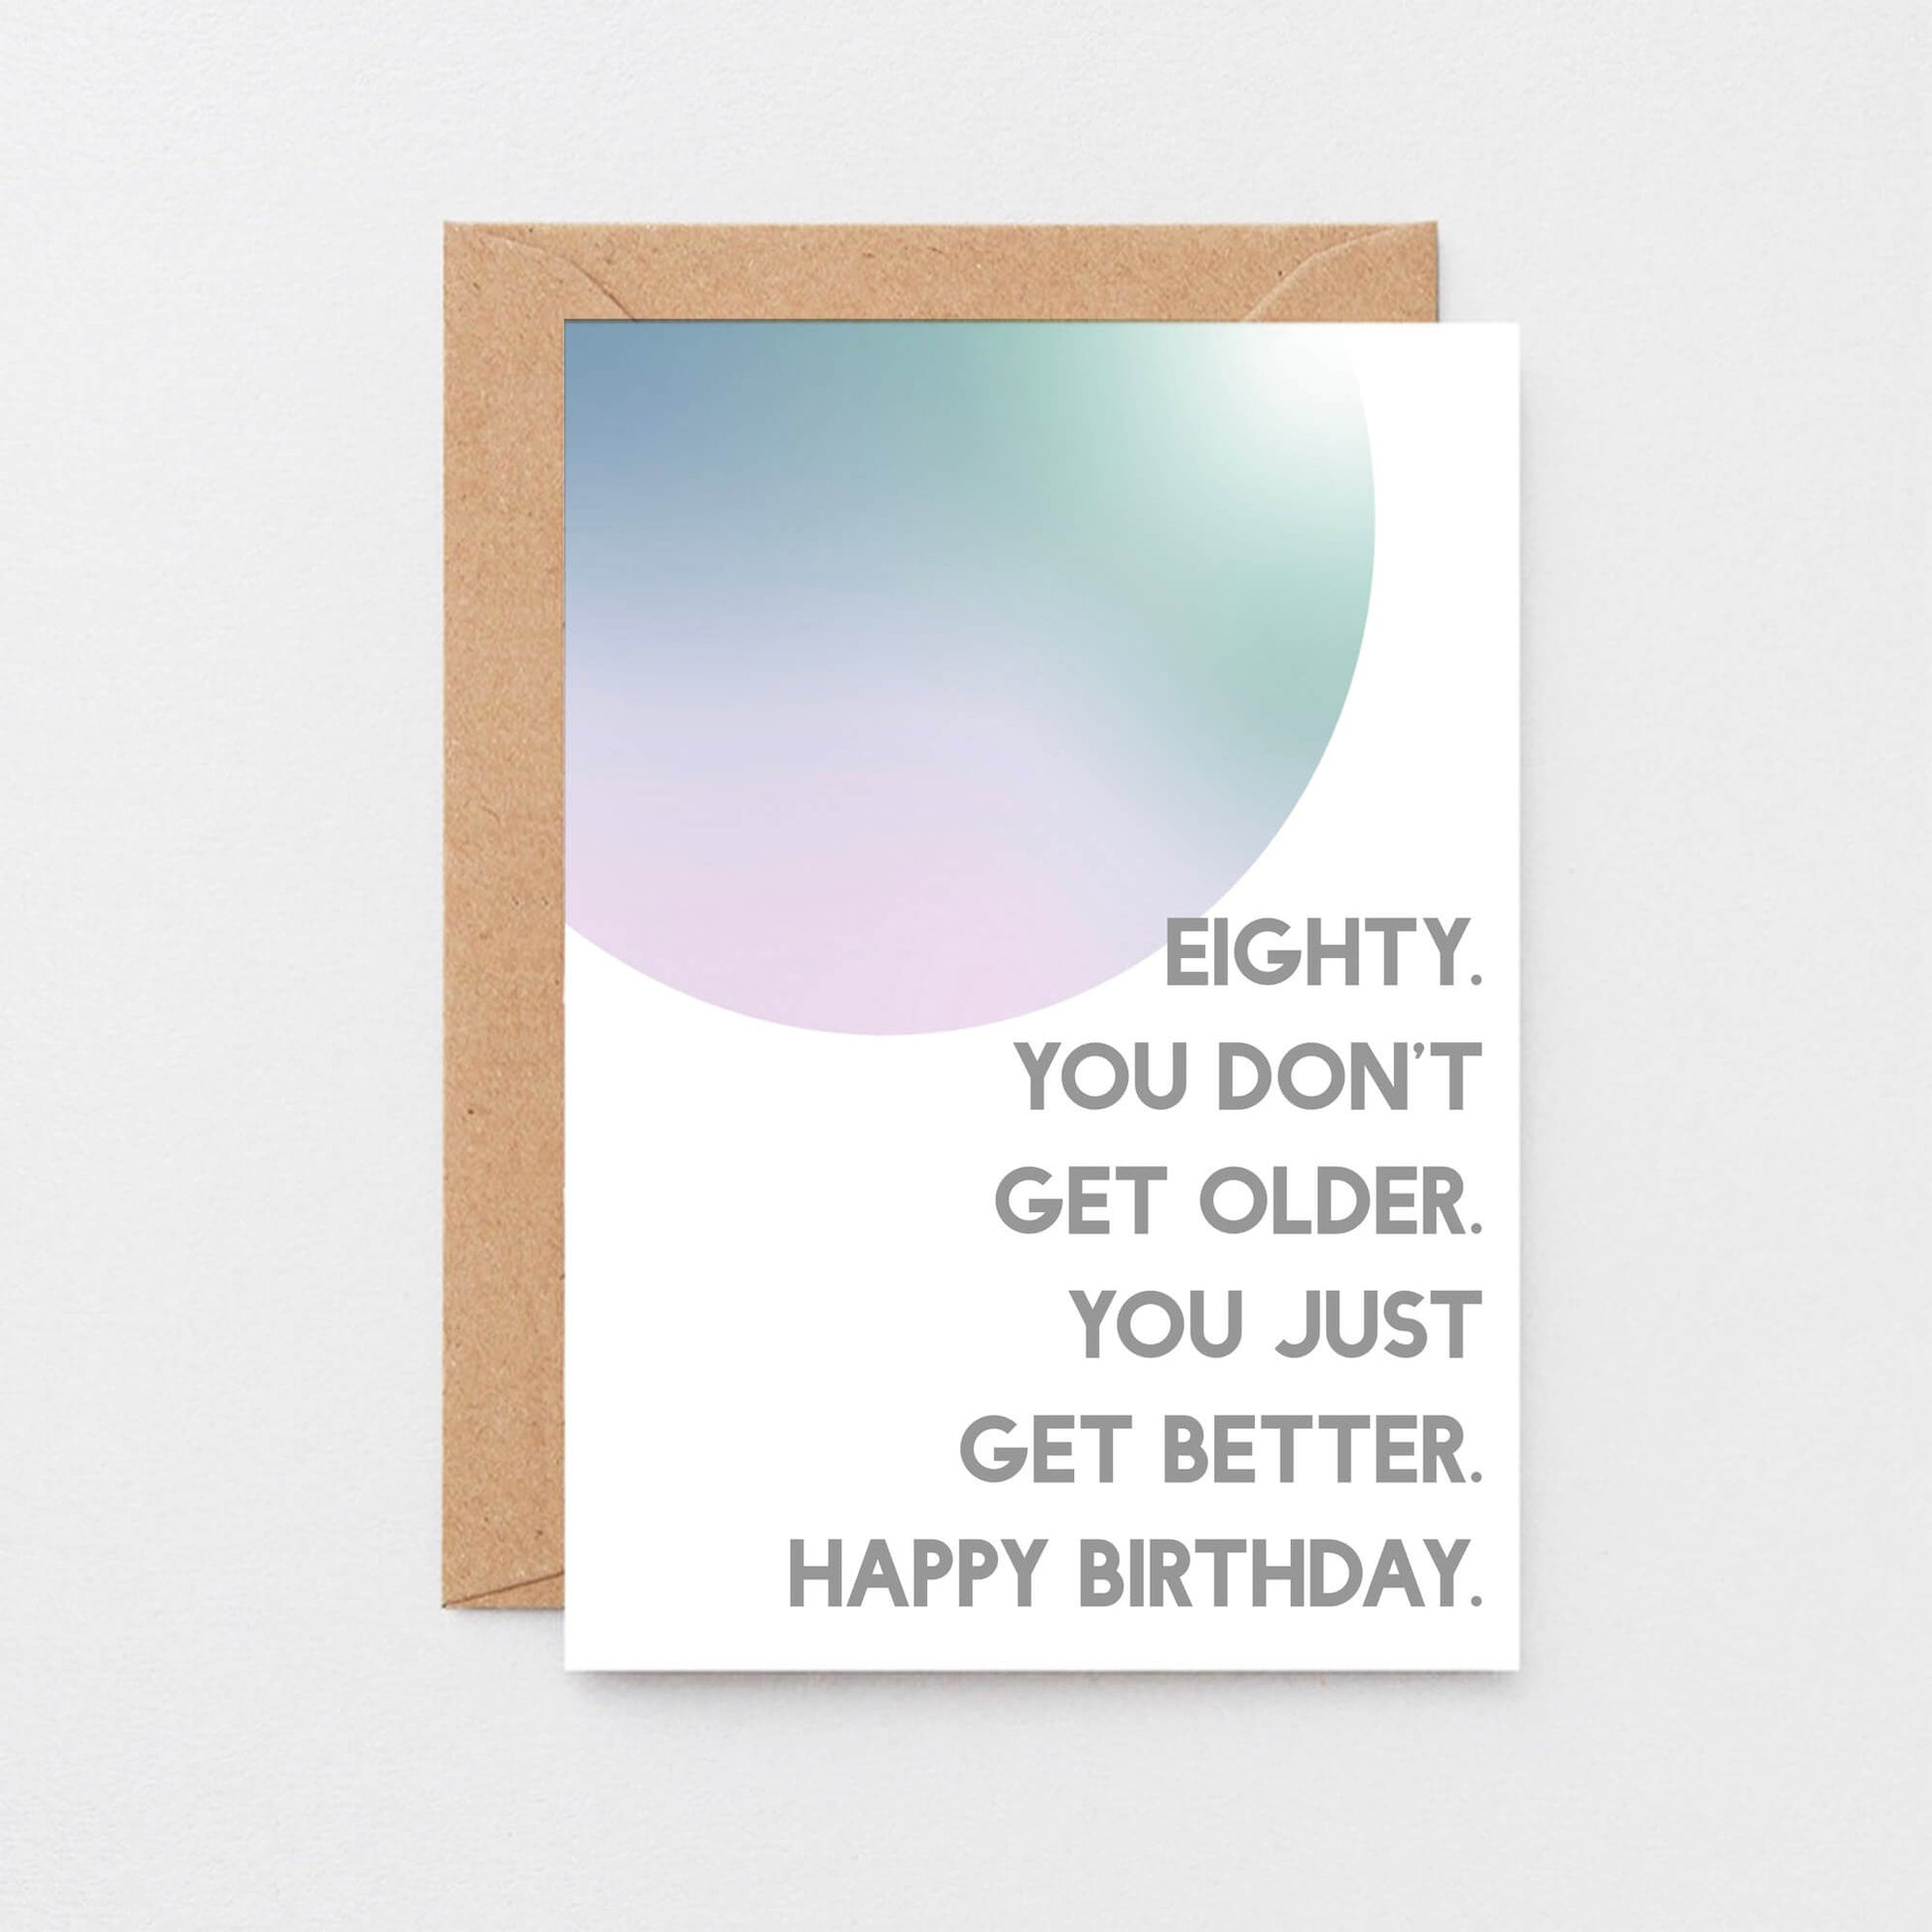 80th Birthday Card by SixElevenCreations. Reads Eighty. You don't get older. You just get better. Happy birthday. Product Code SE2059A6